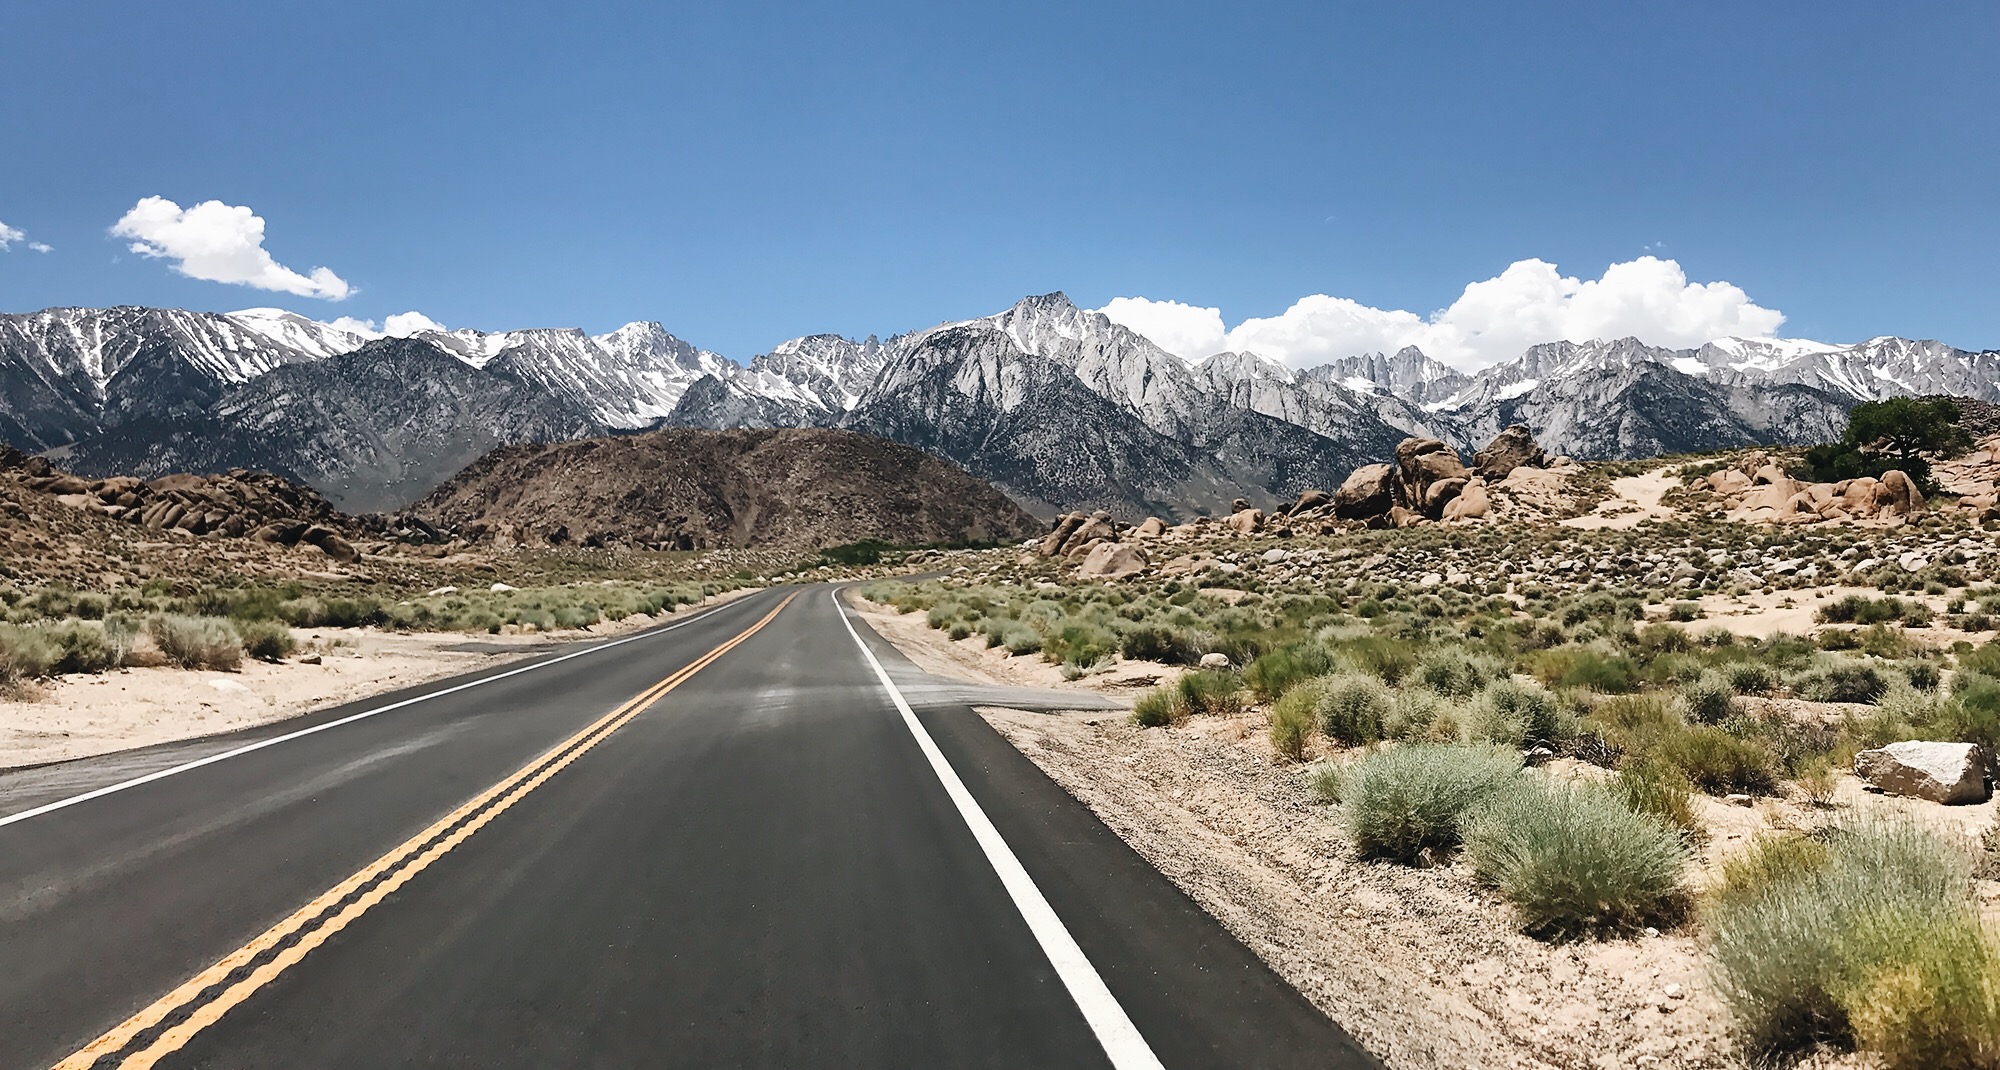 Drive into Alabama Hills, with the snow-capped Sierras in the backdrop